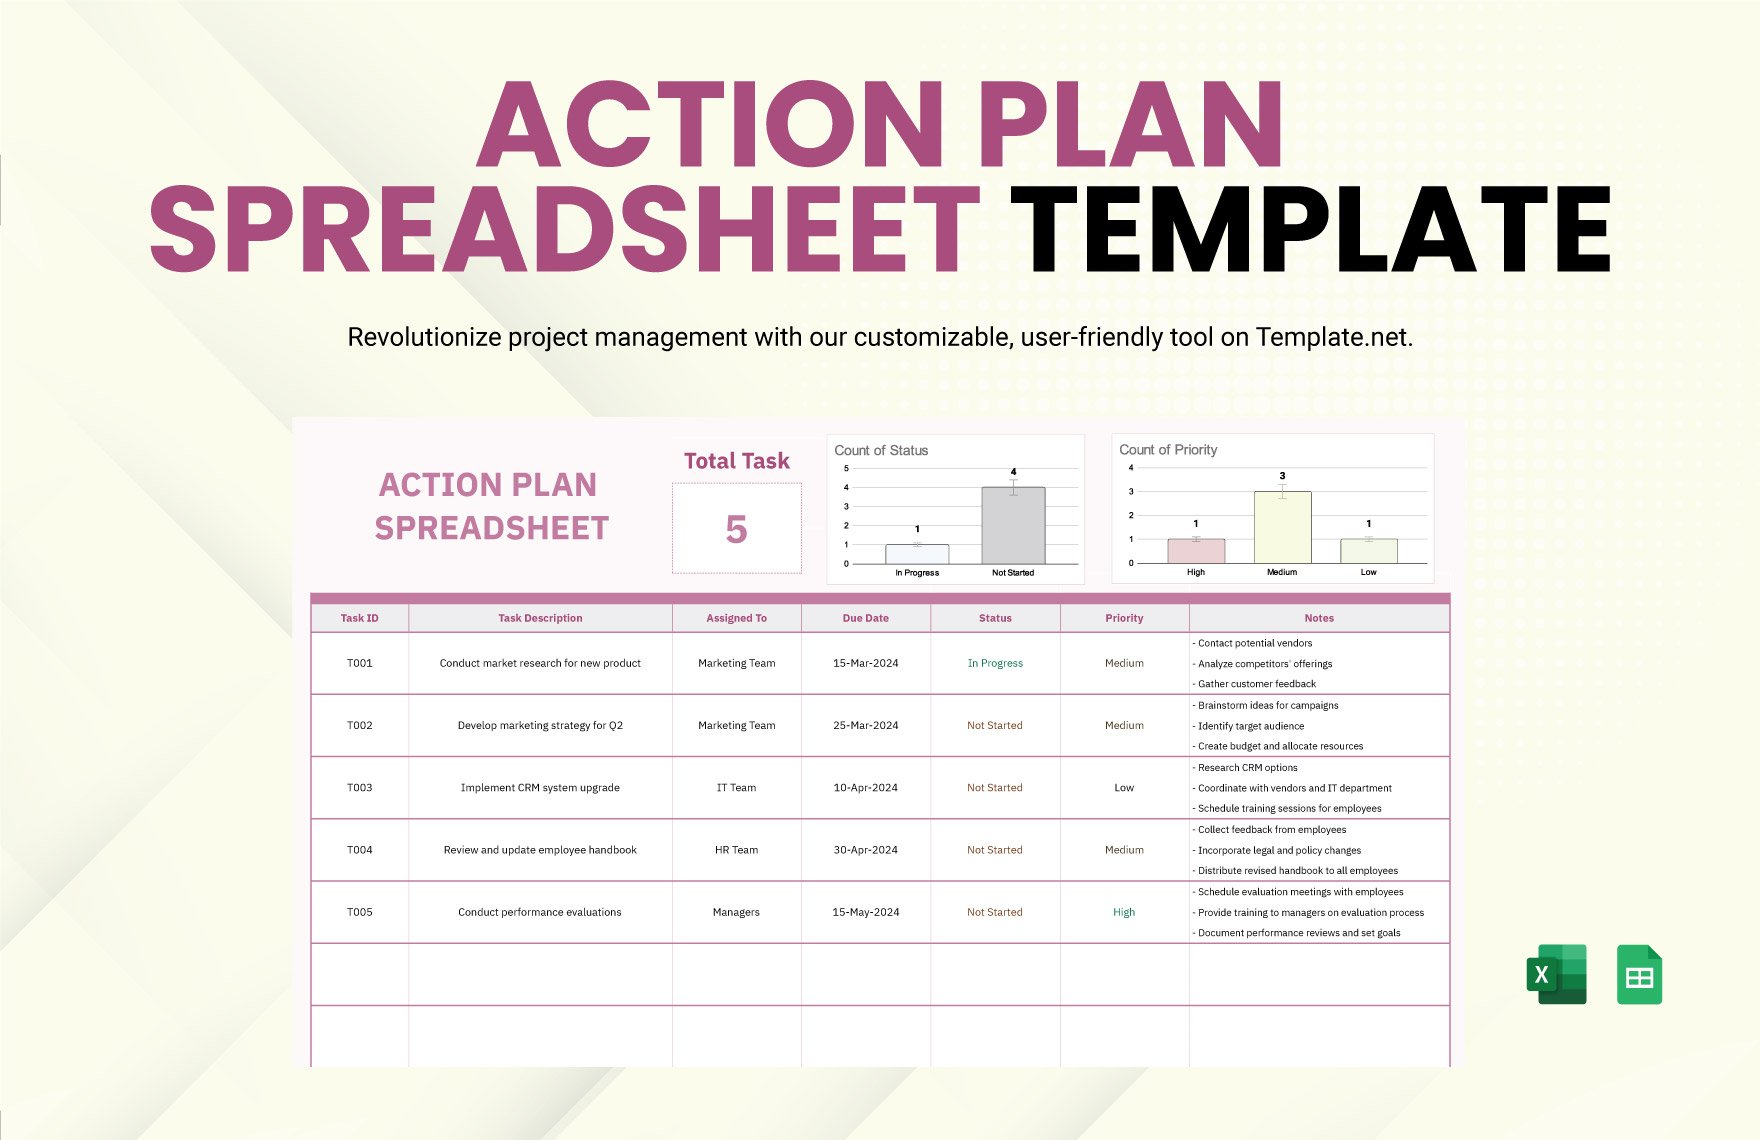 Free Action Plan Spreadsheet Template in Excel, Google Sheets